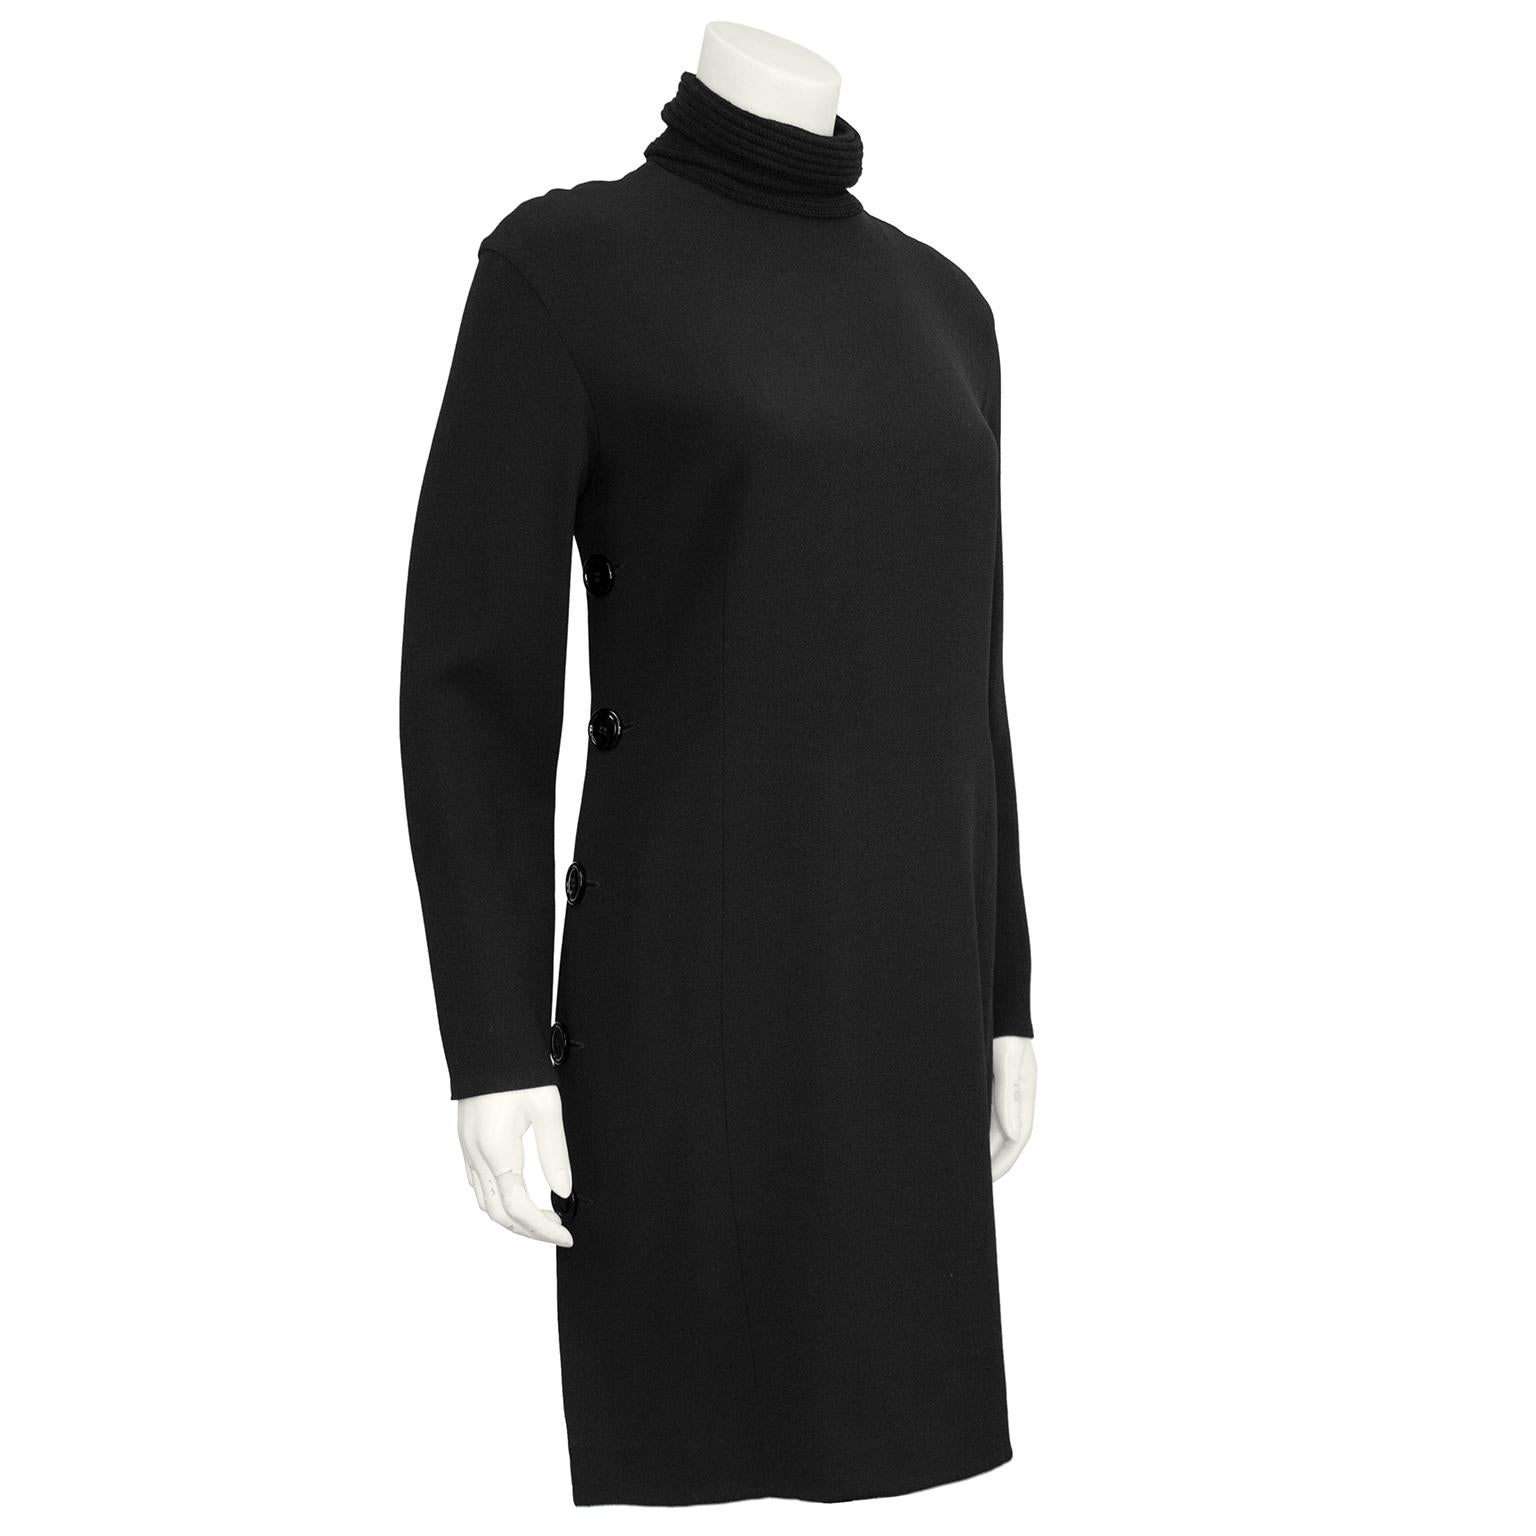 Gianfranco Ferre wool crepe LBD from the 1990s. Shift style with long sleeves and a knitted ribbed wool turtleneck. Large round black buttons down both side seams. Zipper closure up centre back. The dress can easily go from day to night with a quick